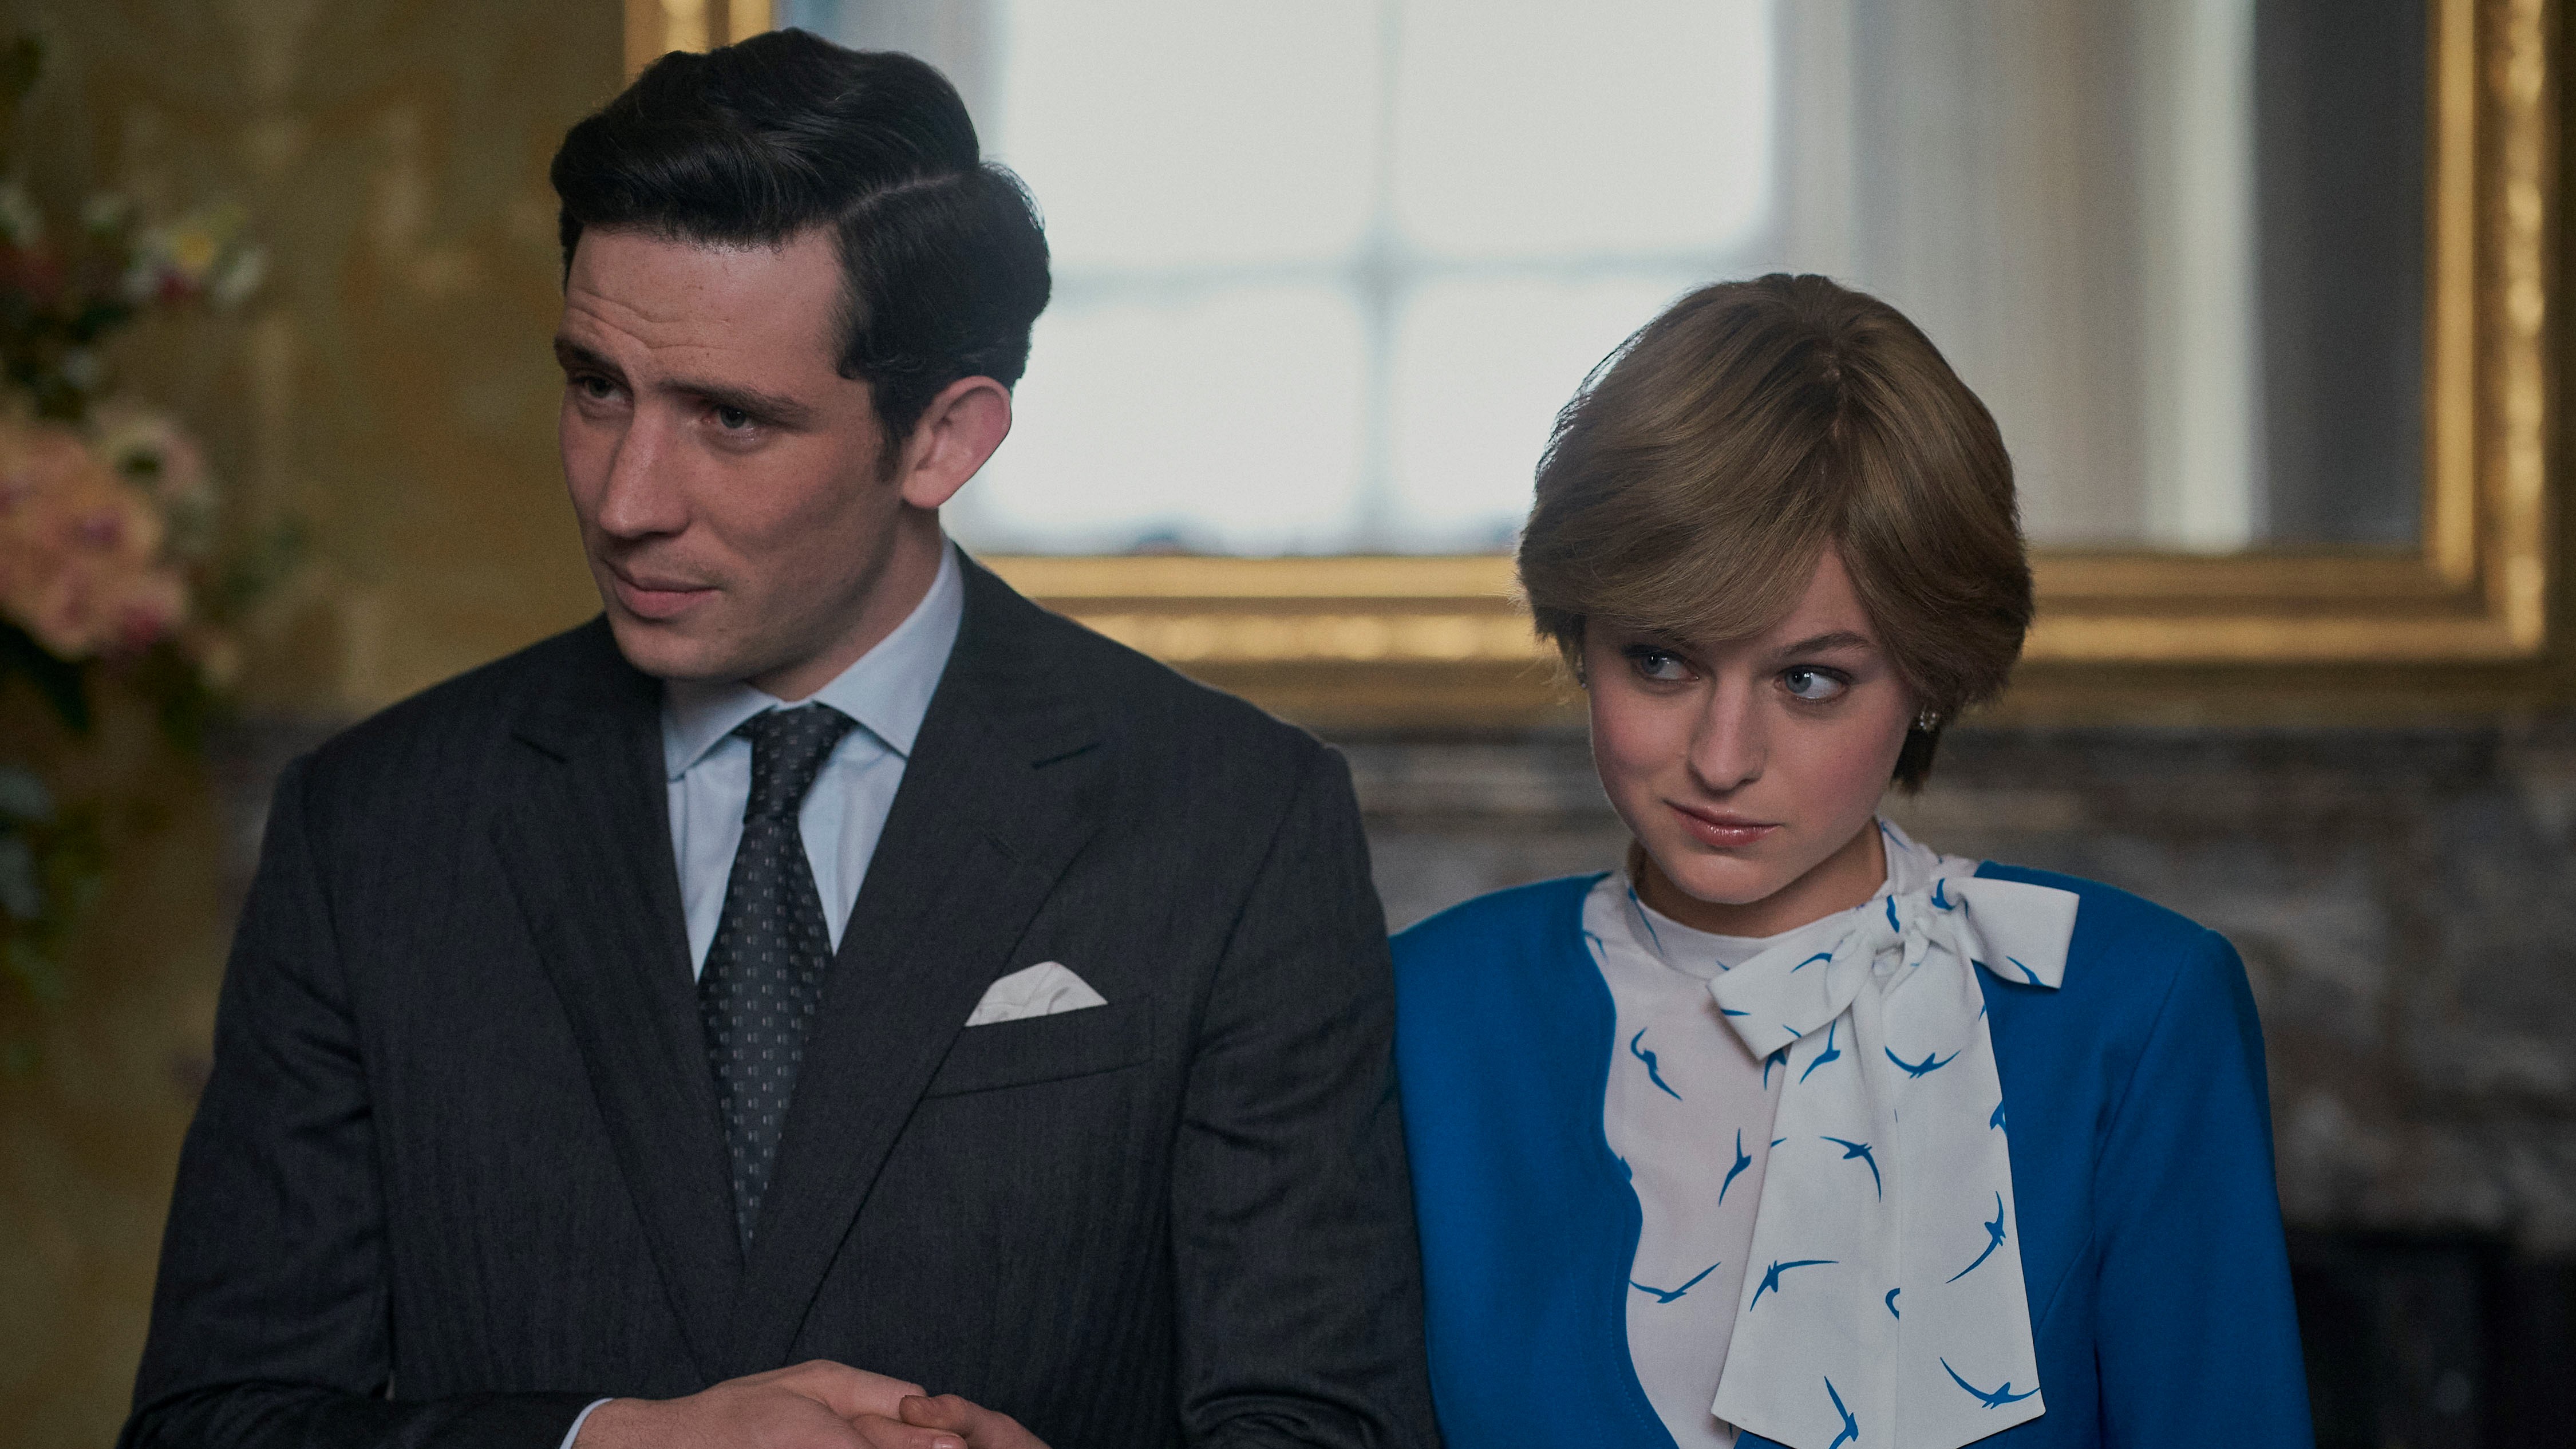 Josh O'Connor's Prince Charles and Emma Corrin's Diana engage in conversation in The Crown season 4